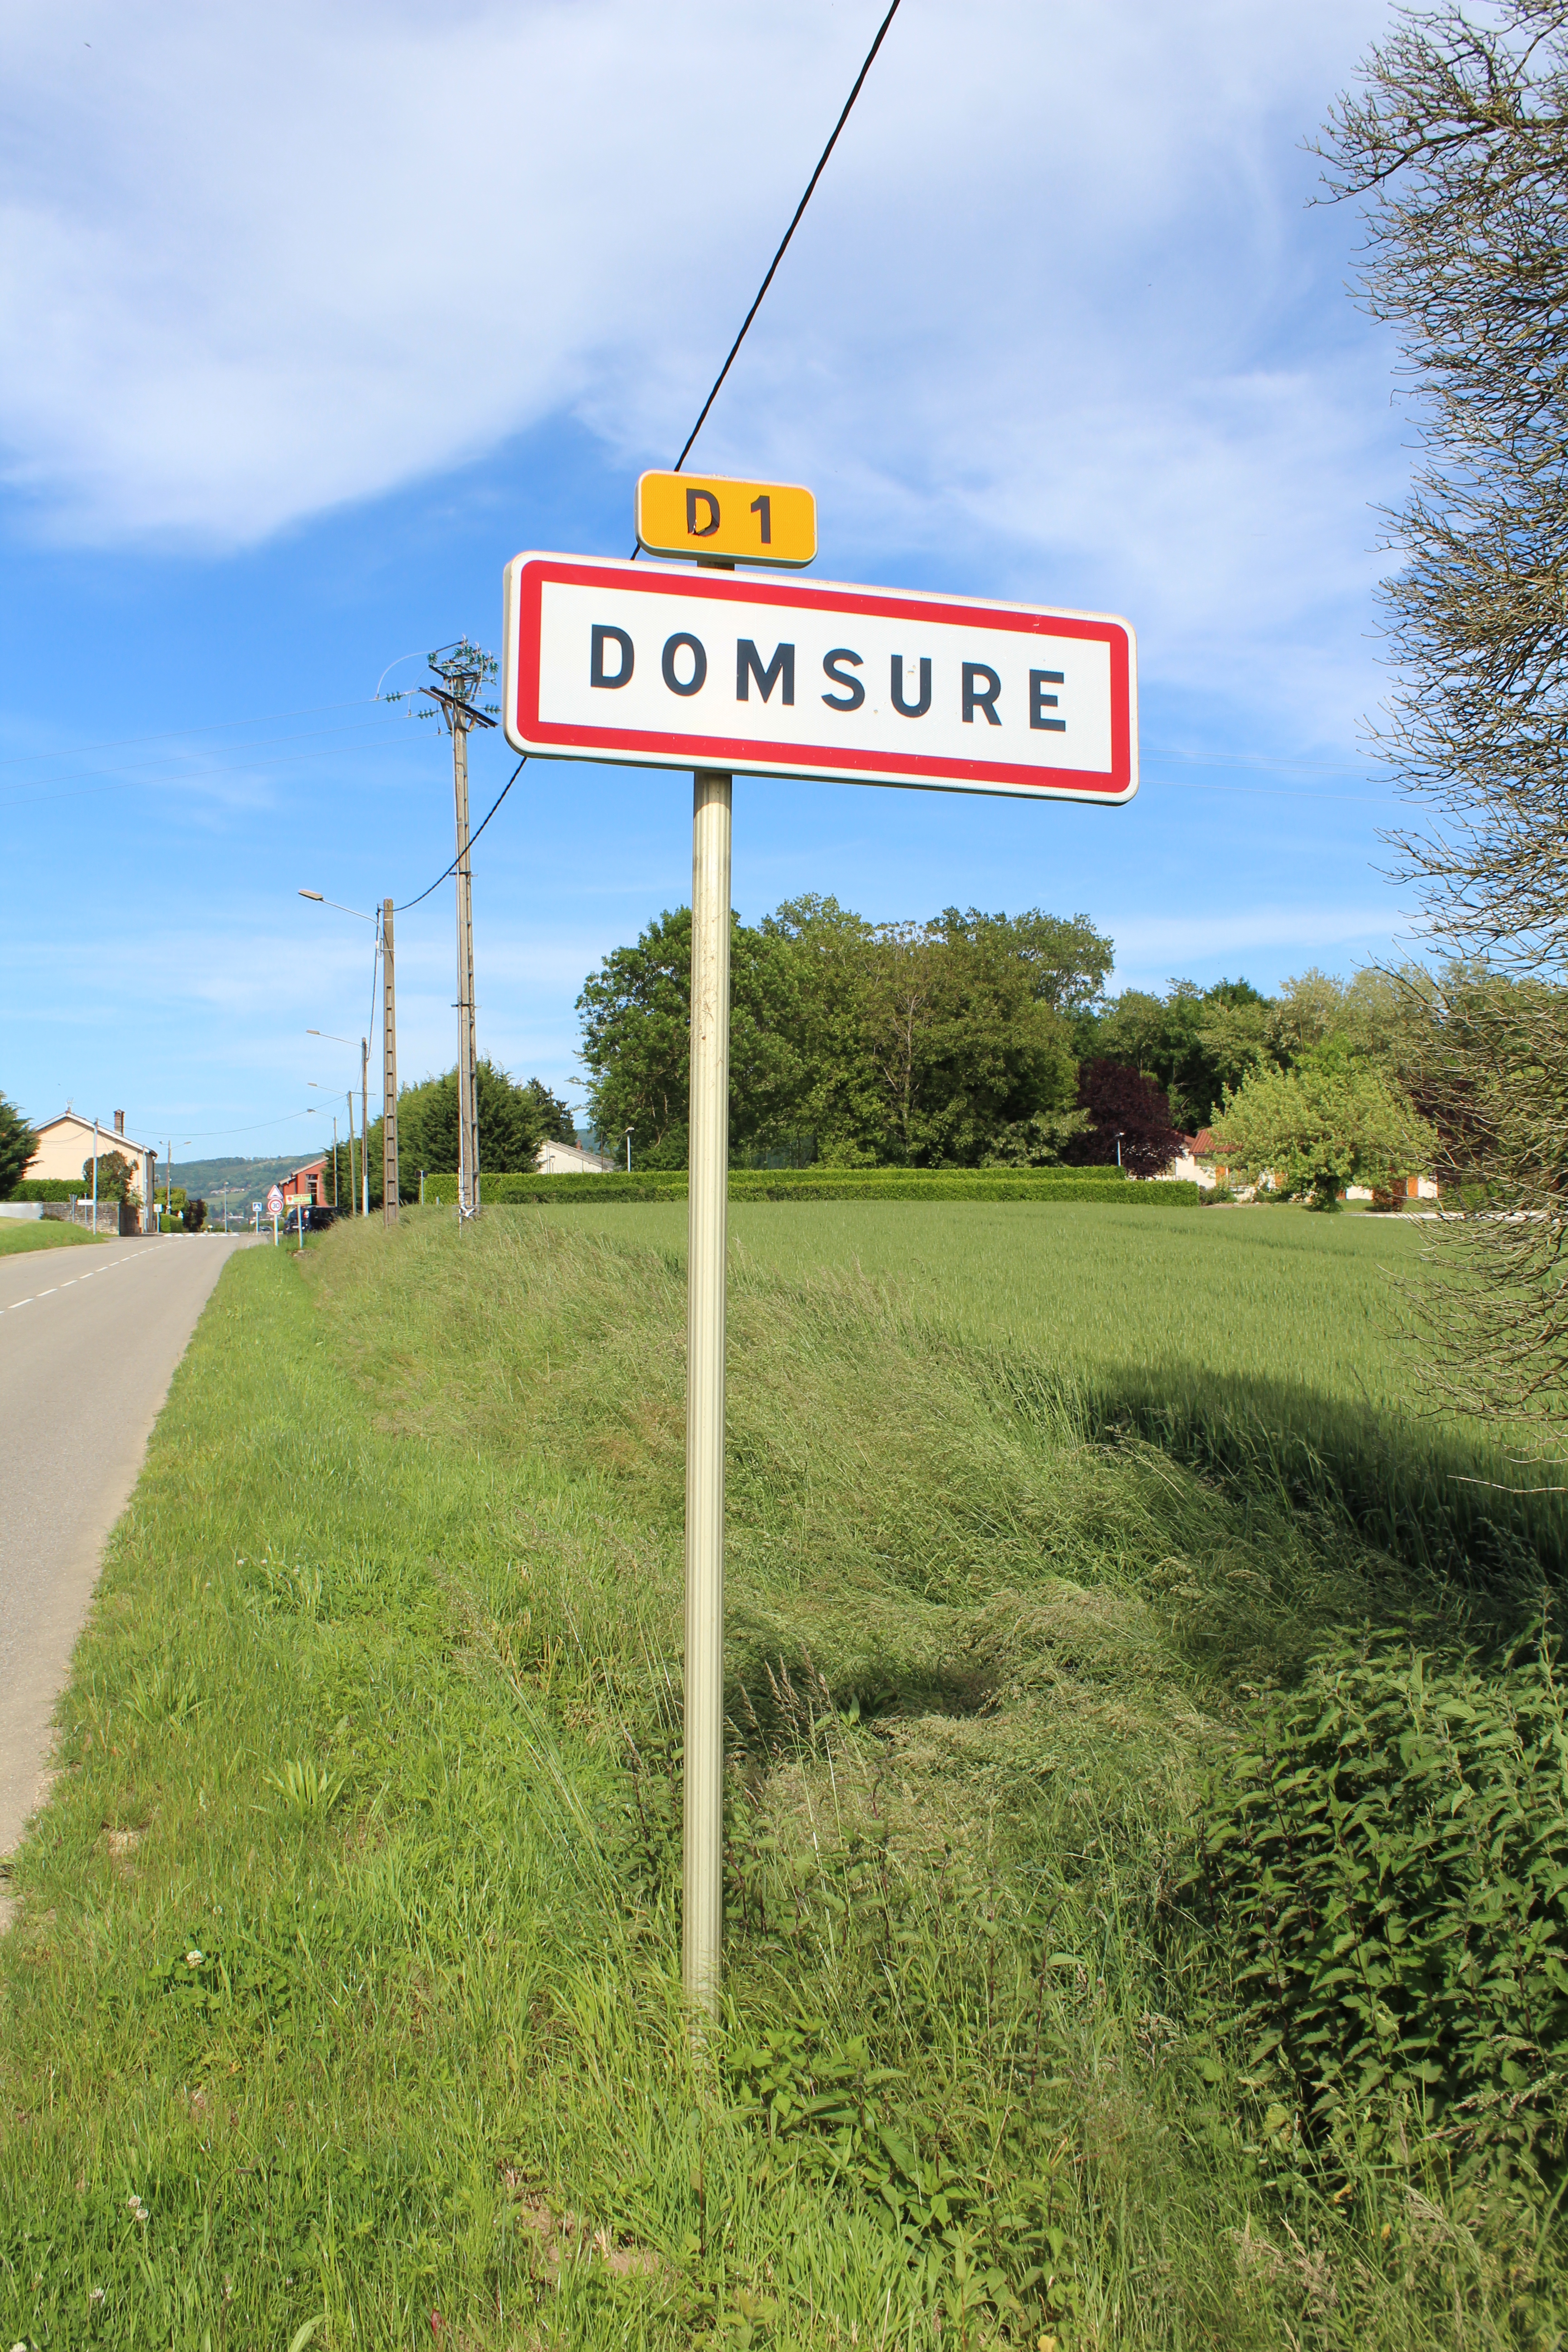 Delay-Moiraud Domsure